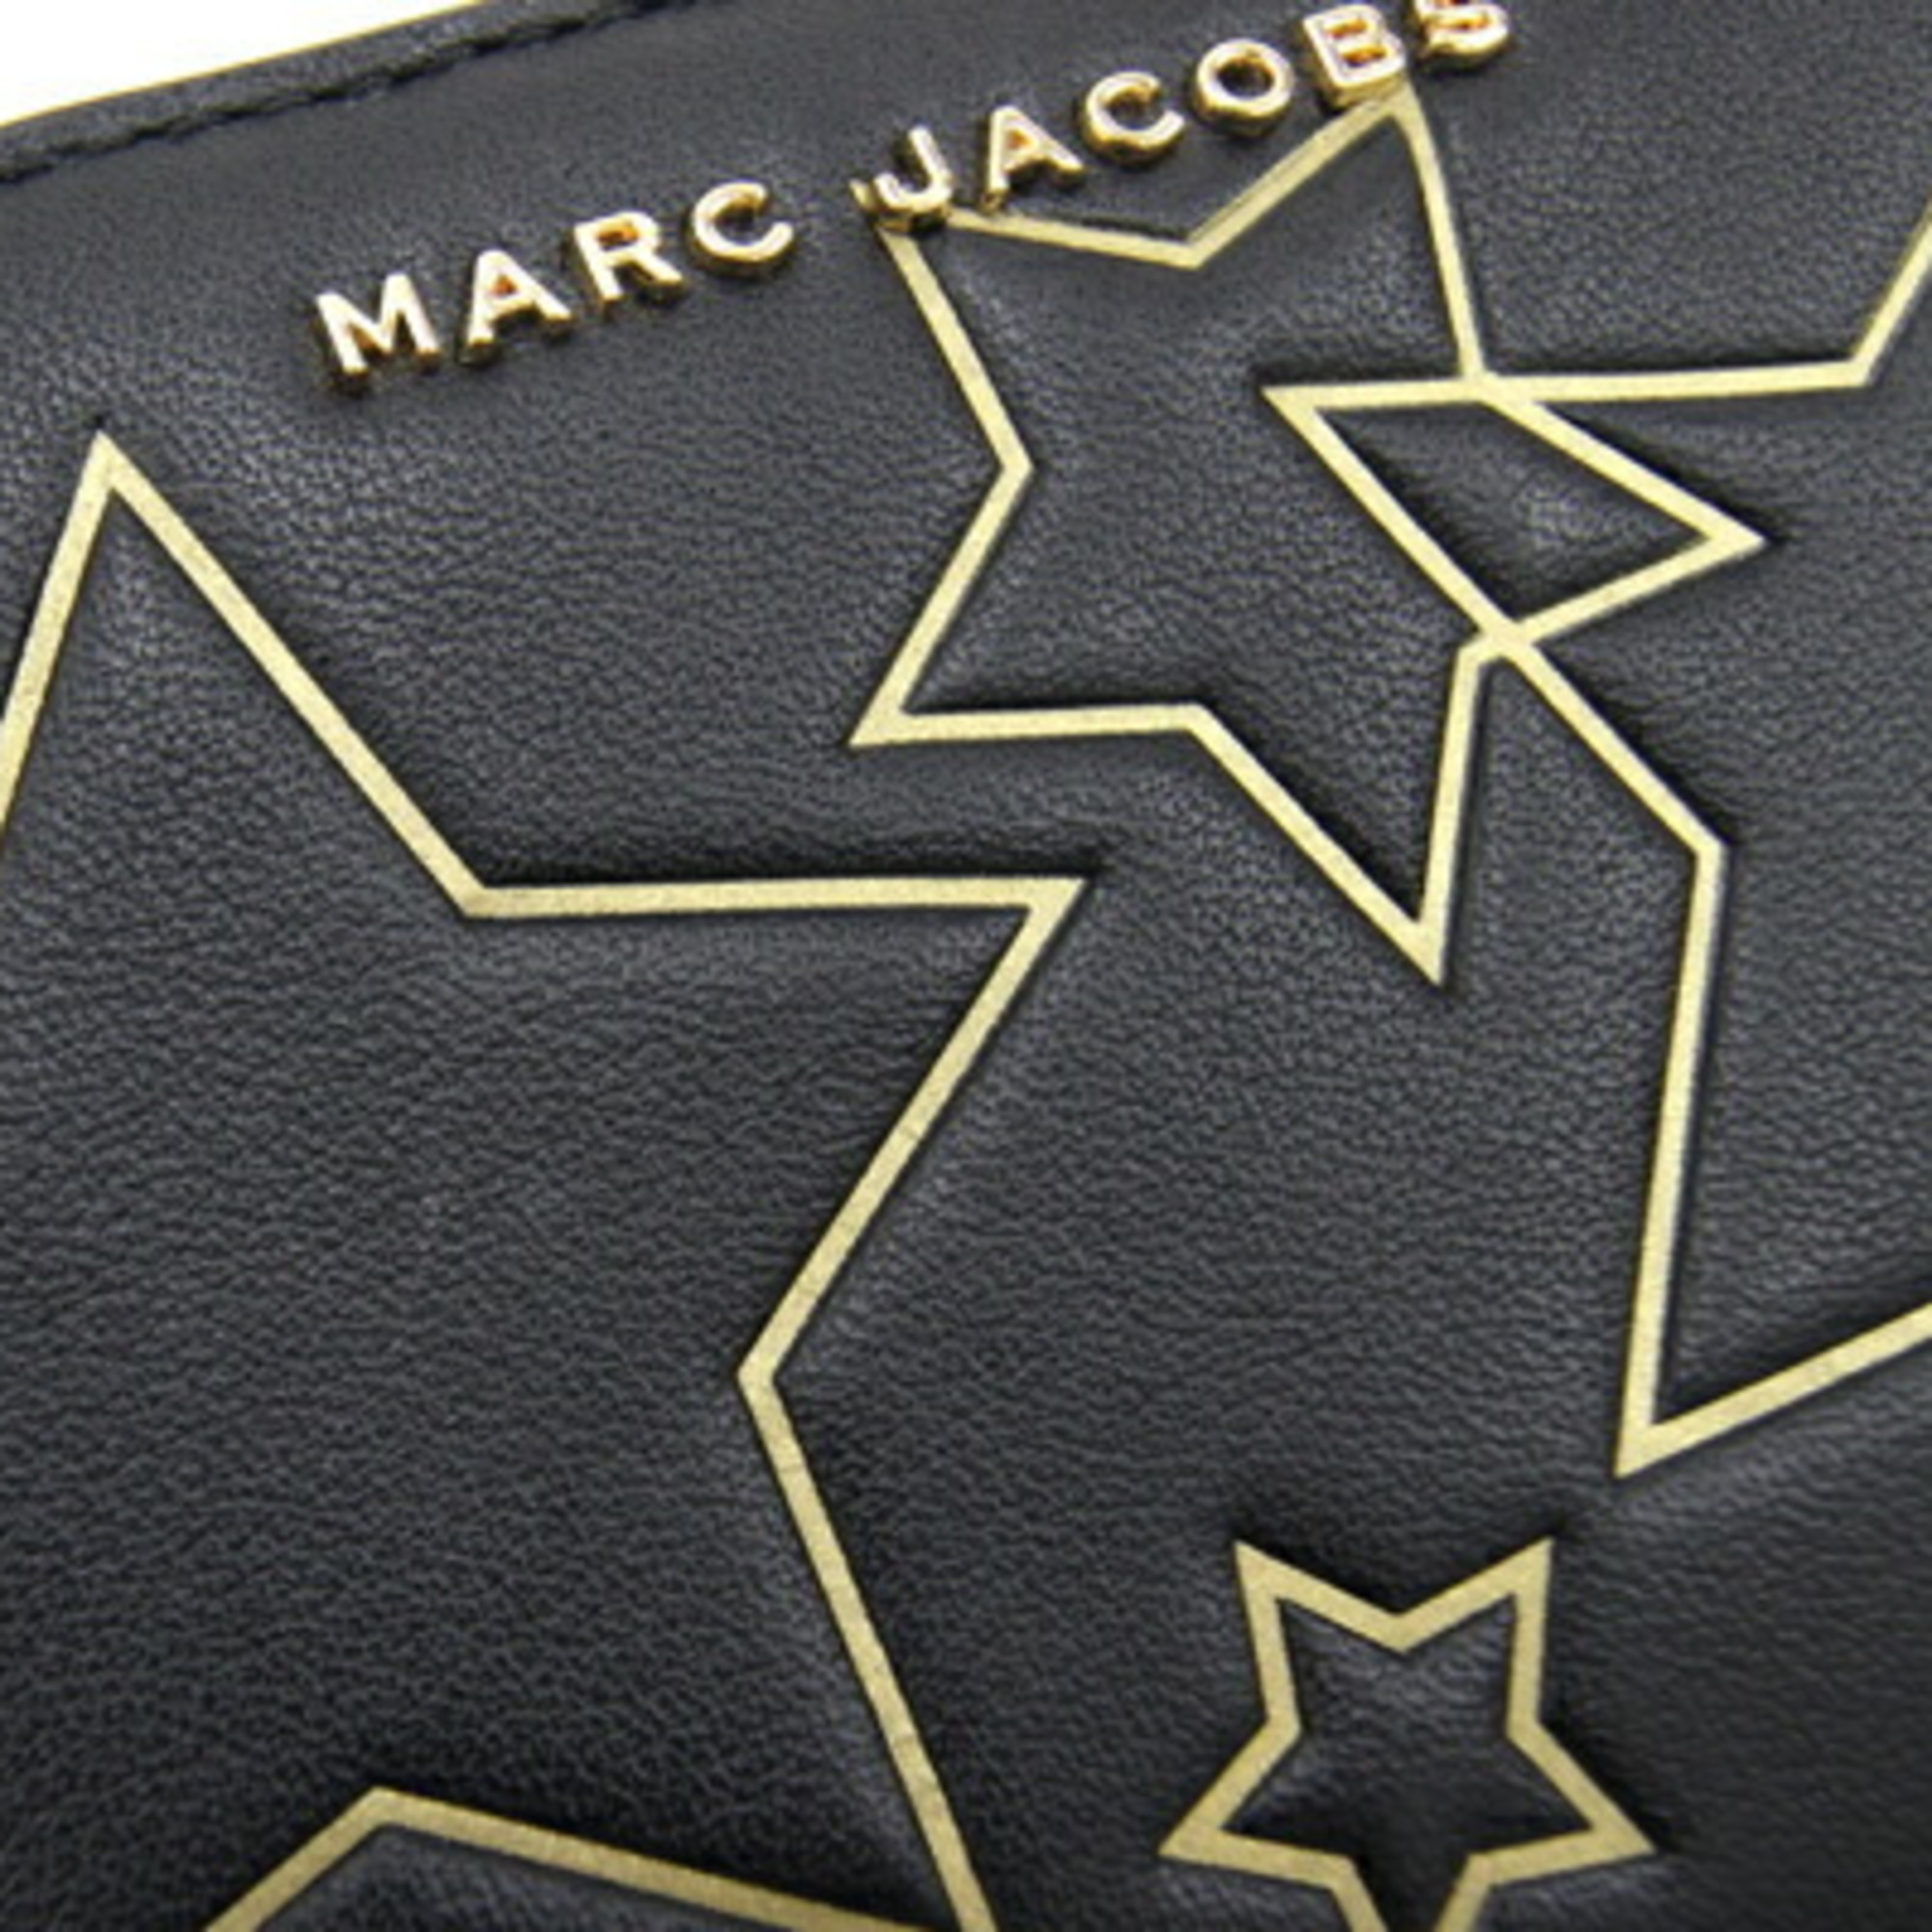 Marc Jacobs Bifold Wallet Star Compact M0013327-001 Black Leather Ladies MARC JACOBS